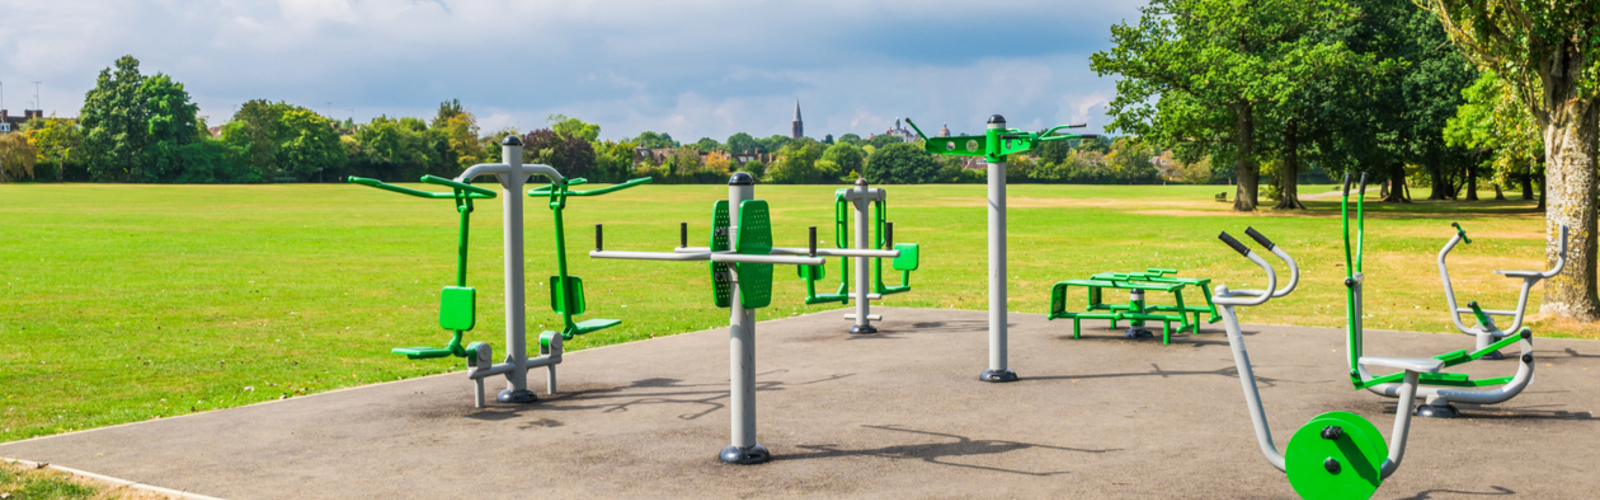 An empty outdoor gym